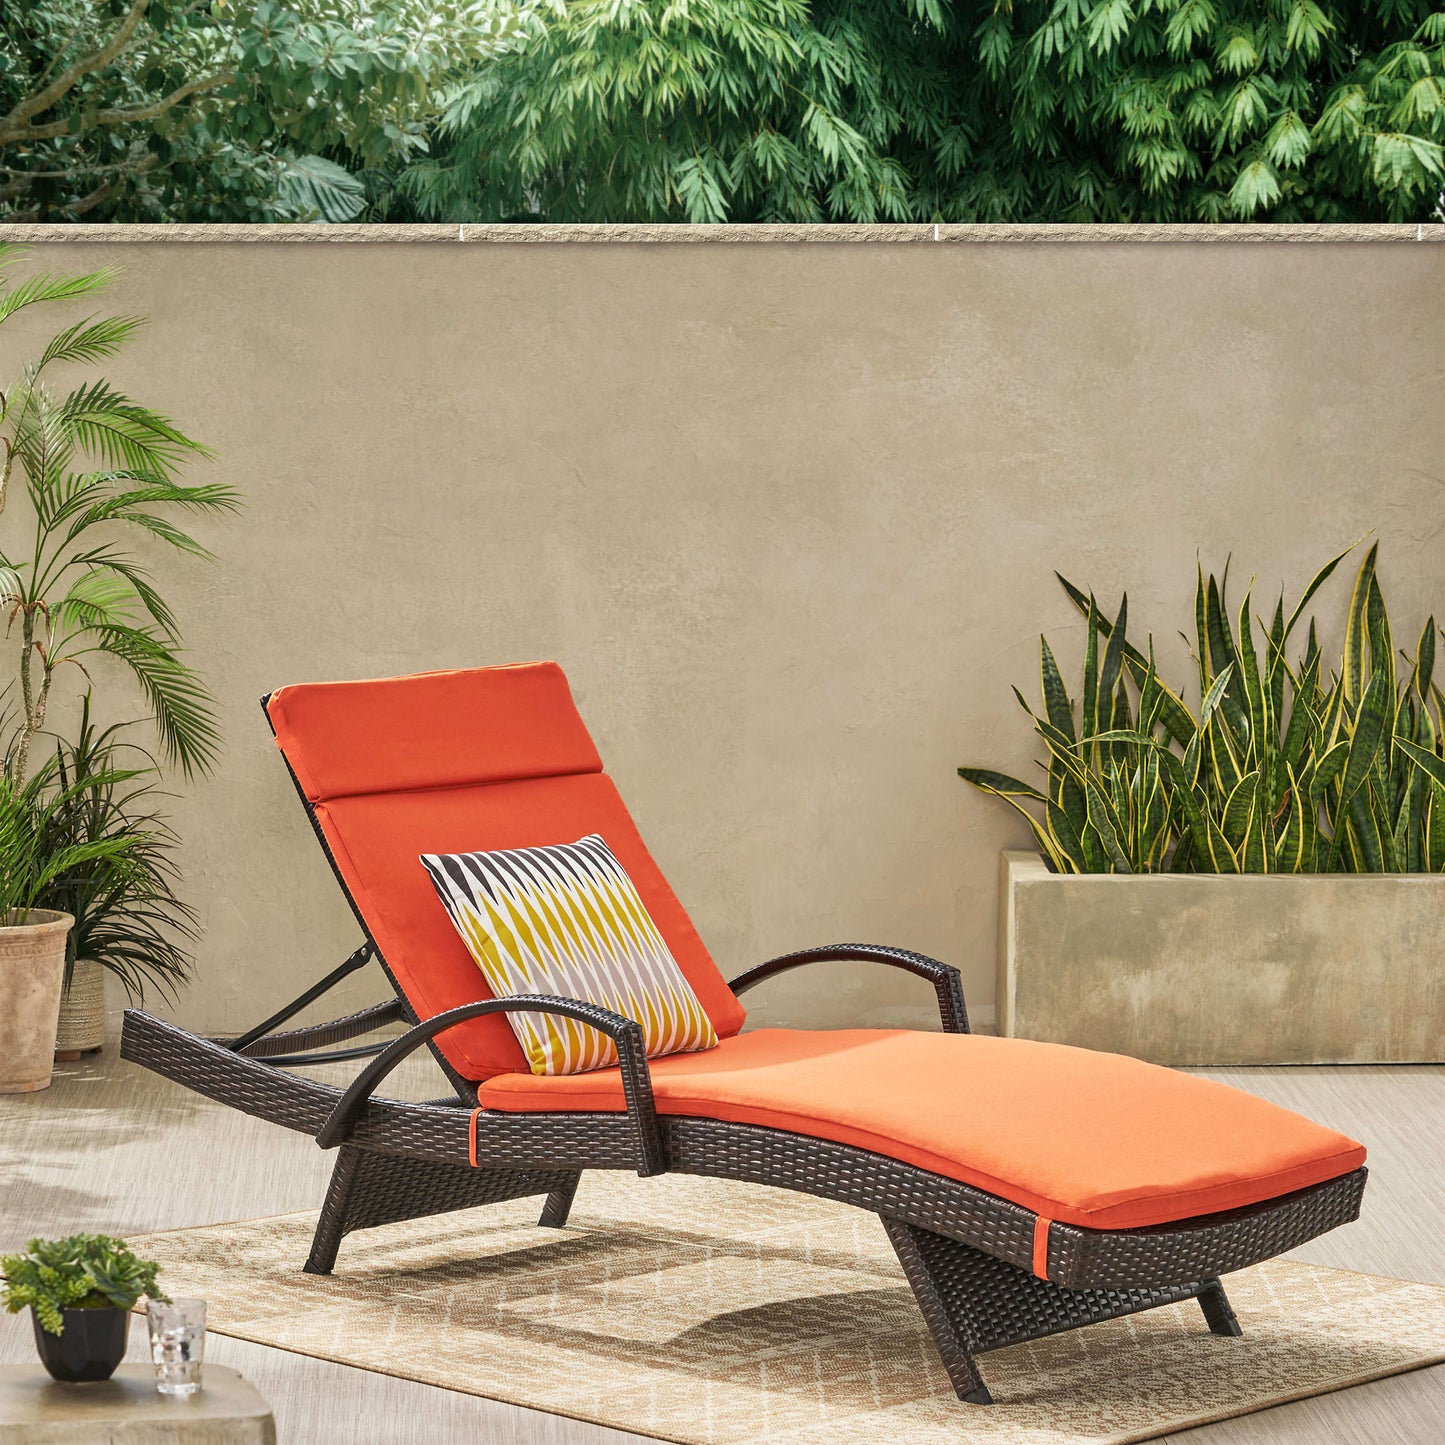 Savana Outdoor Wicker Lounge with Arms with Water Resistant Cushion